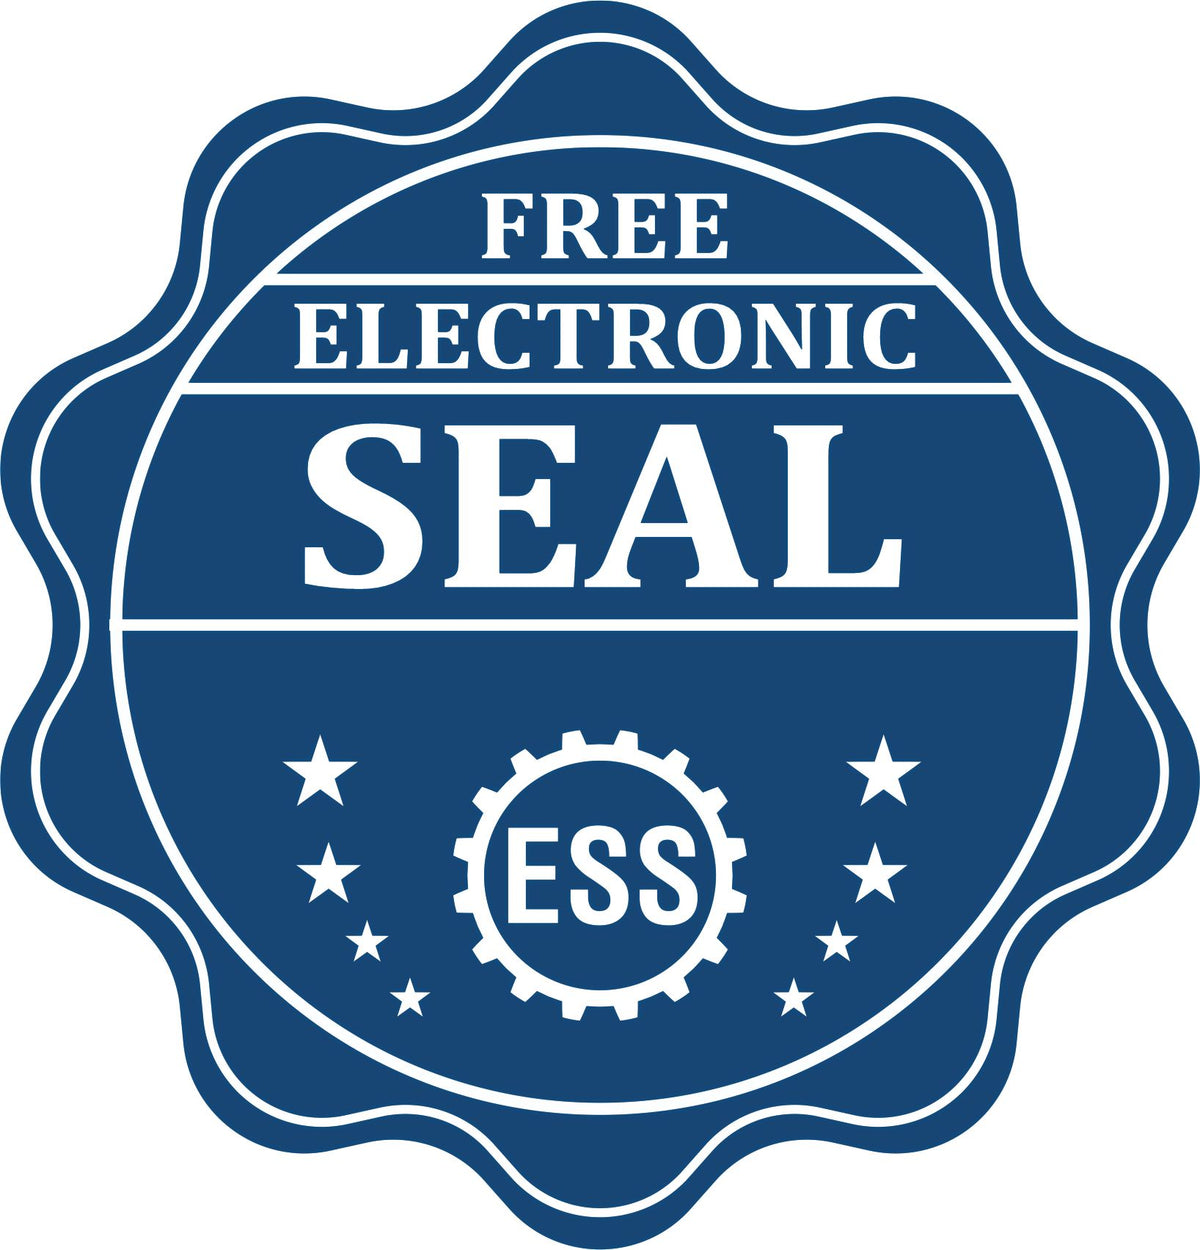 A badge showing a free electronic seal for the Slim Pre-Inked Wisconsin Land Surveyor Seal Stamp with stars and the ESS gear on the emblem.